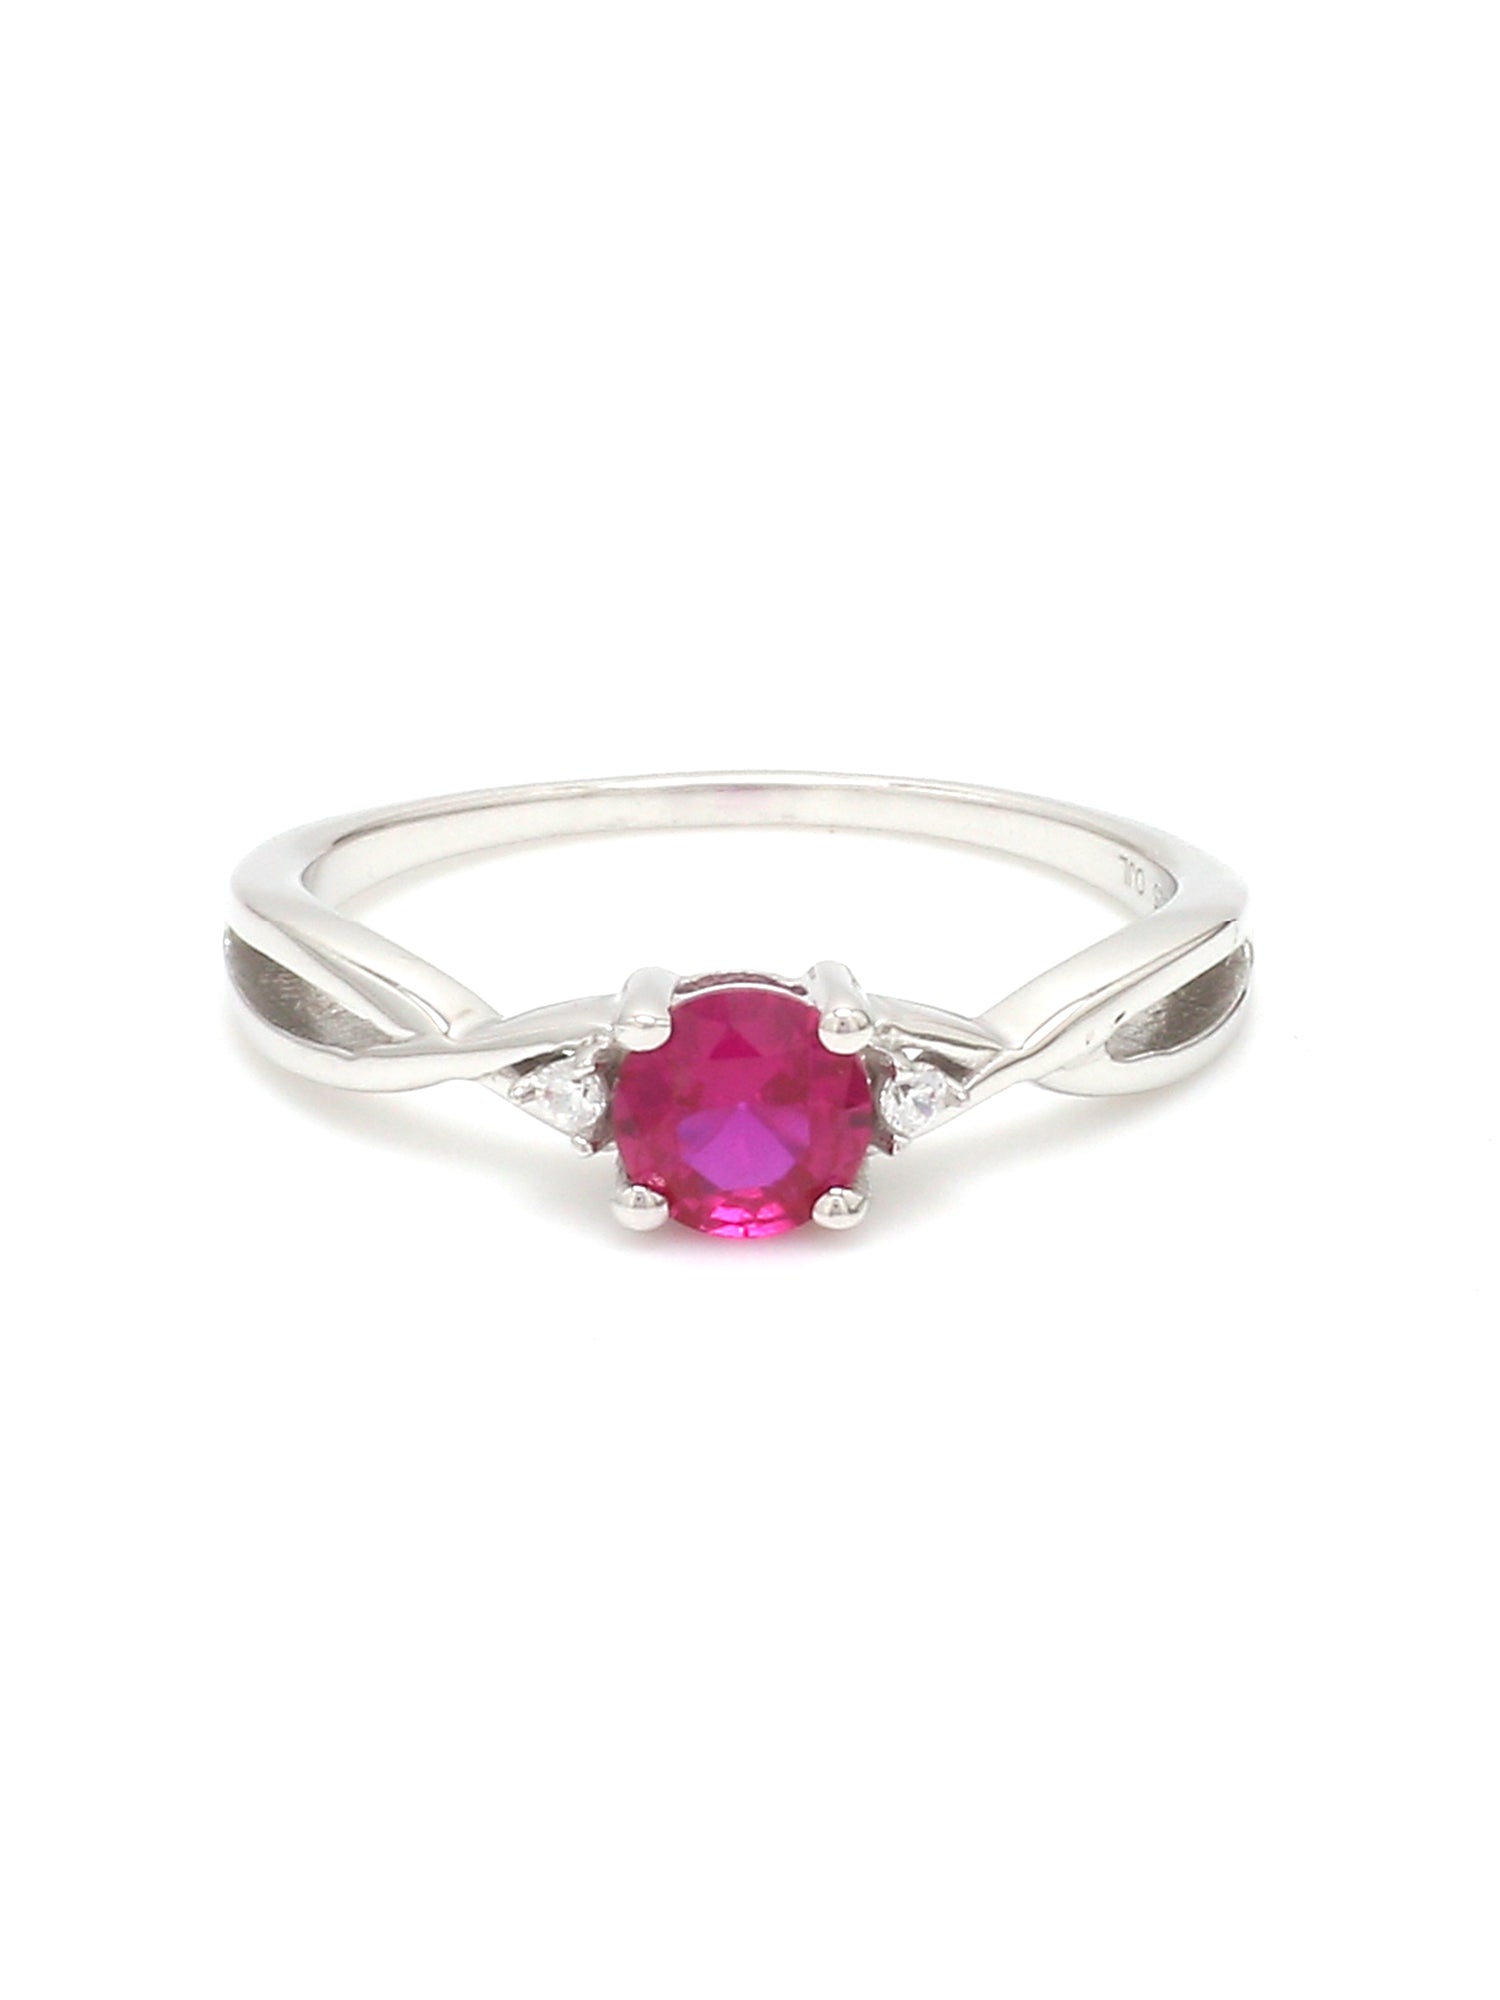 RED RUBY SOLITAIRE SILVER RING FOR WOMEN-1